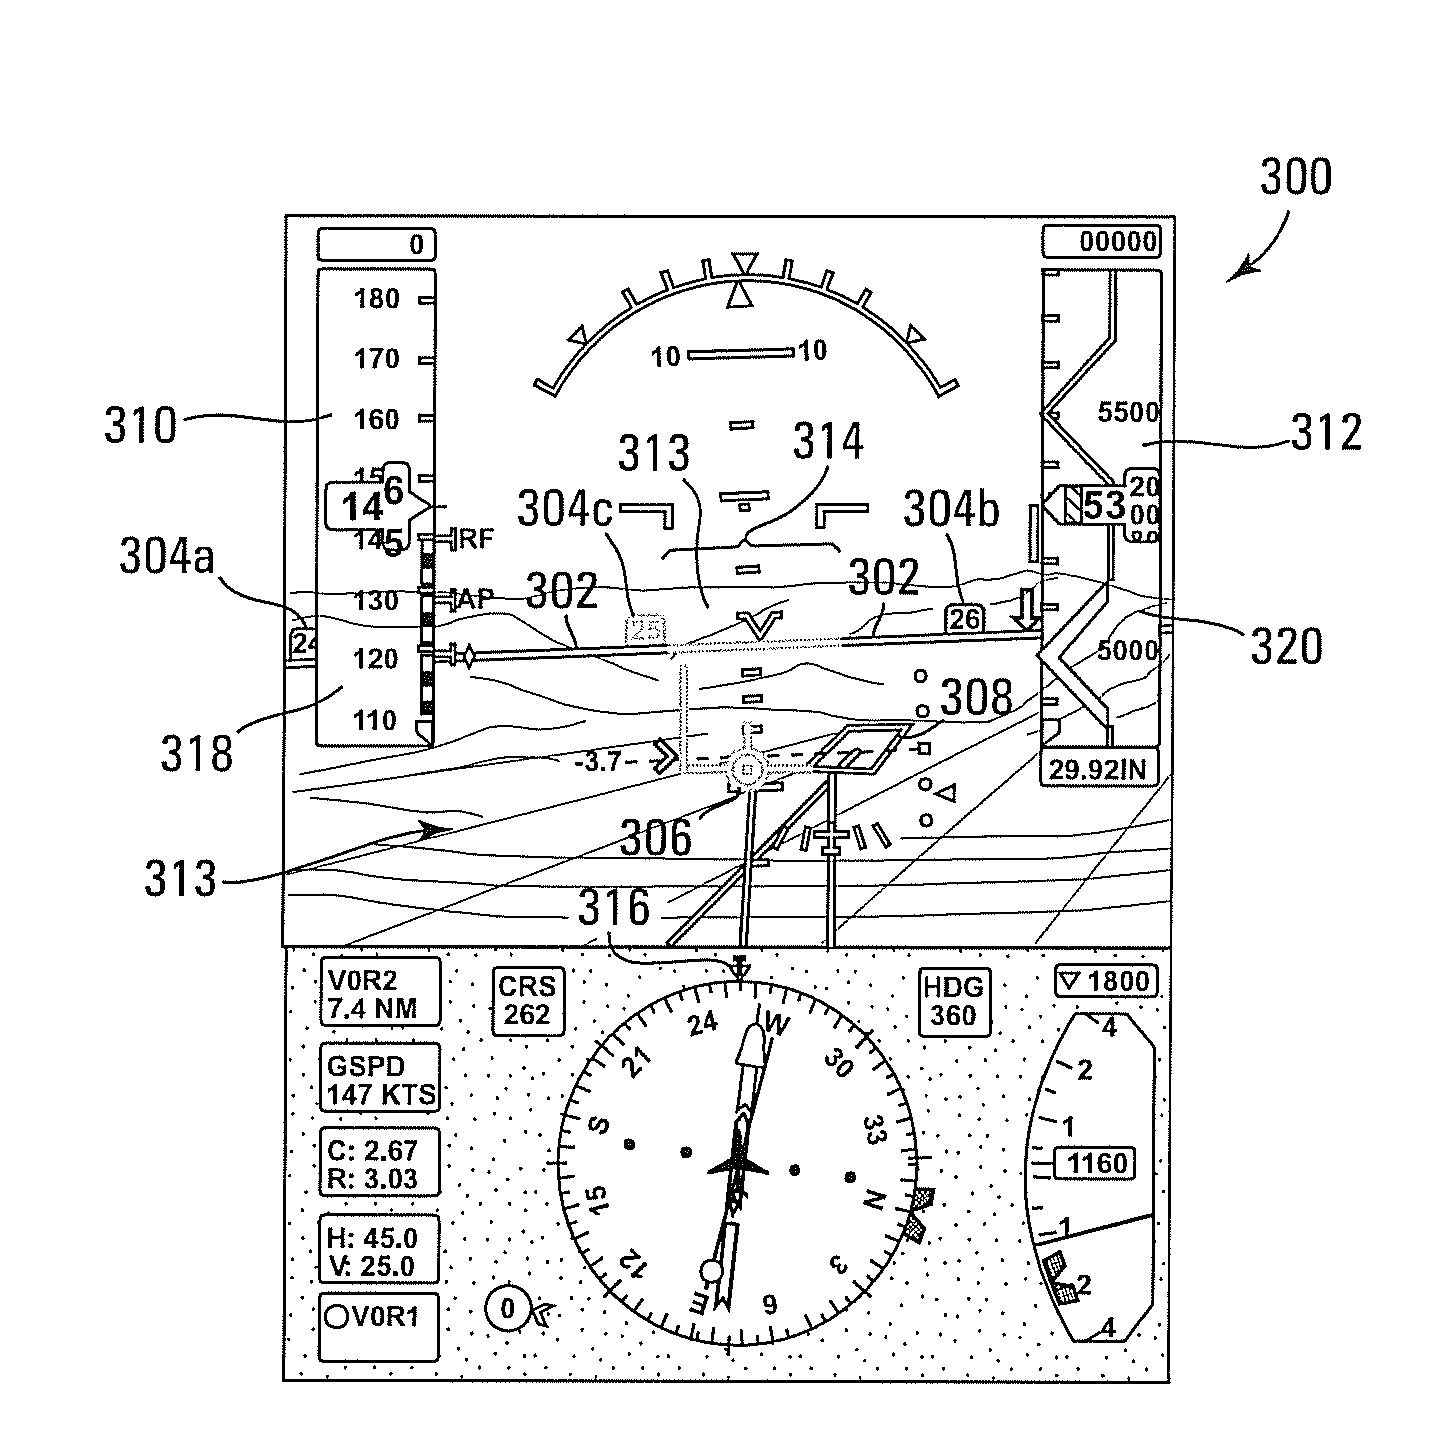 System and method for increasing visibility of critical flight information on aircraft displays